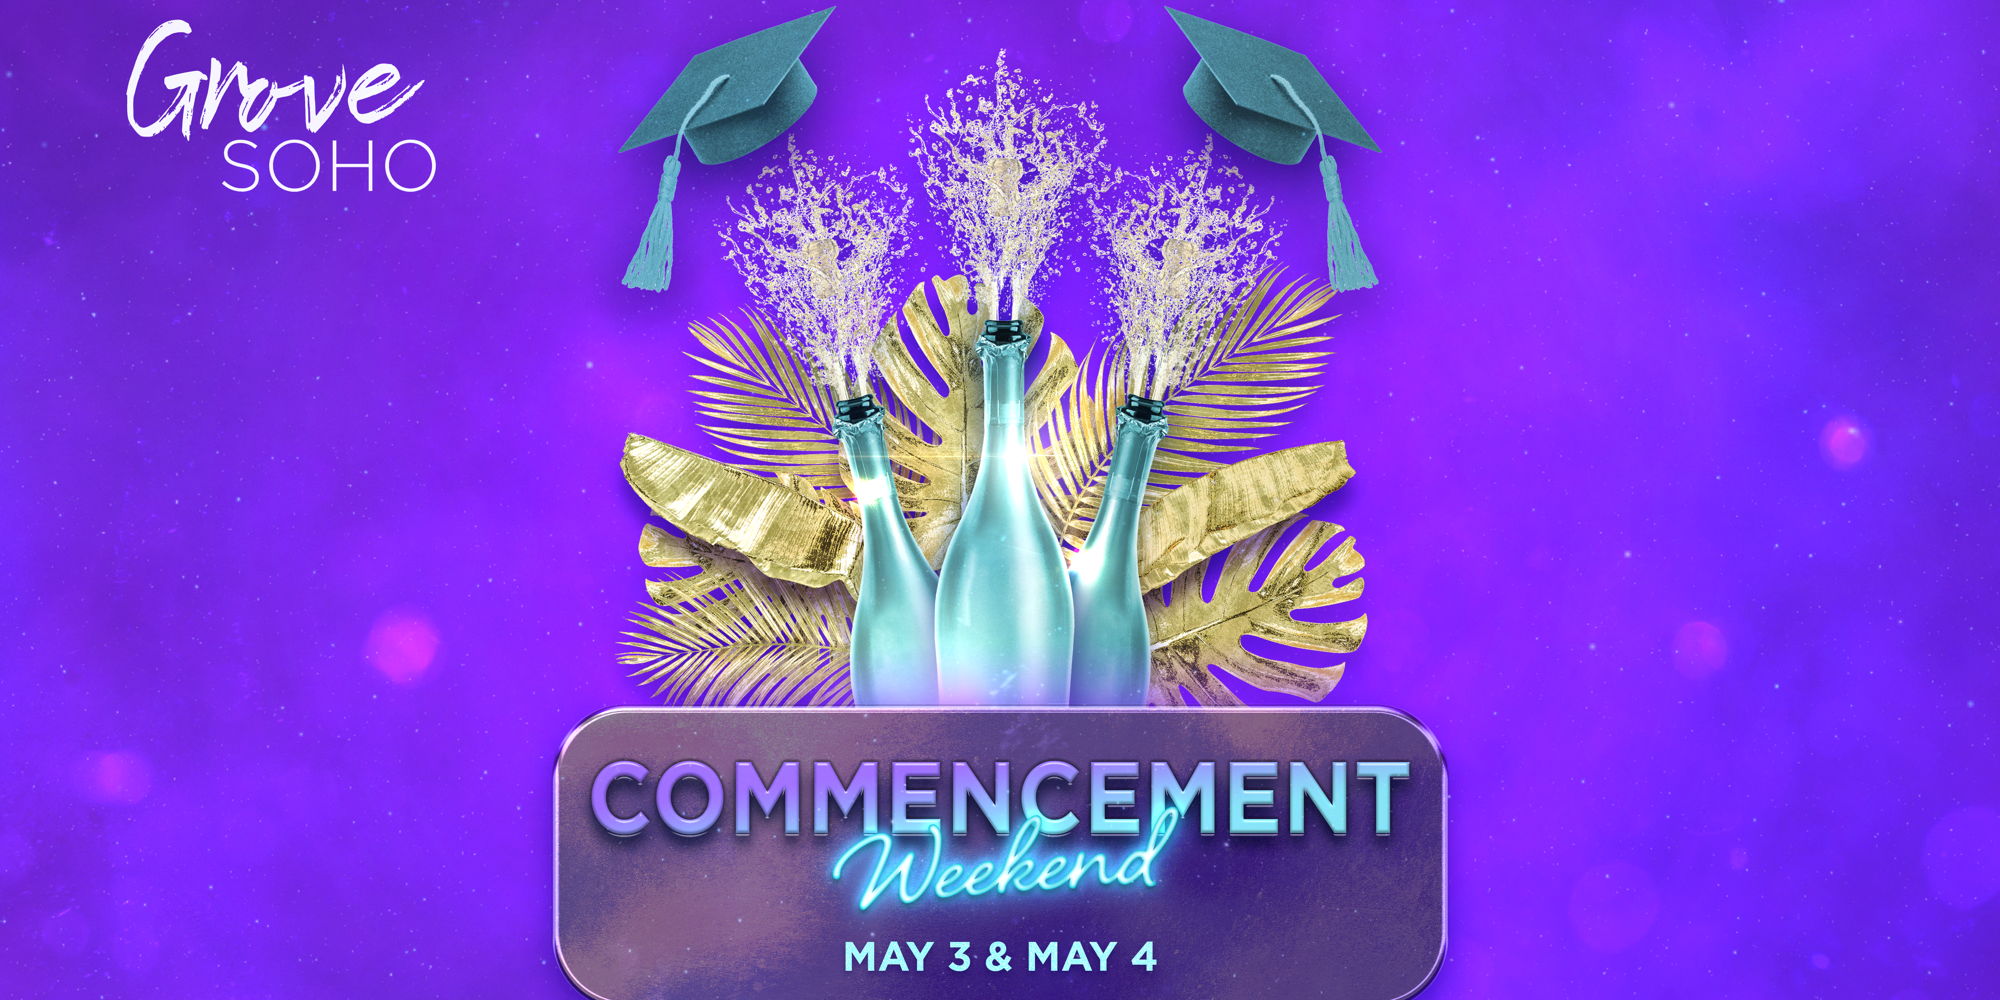 Commencement Weekend! promotional image